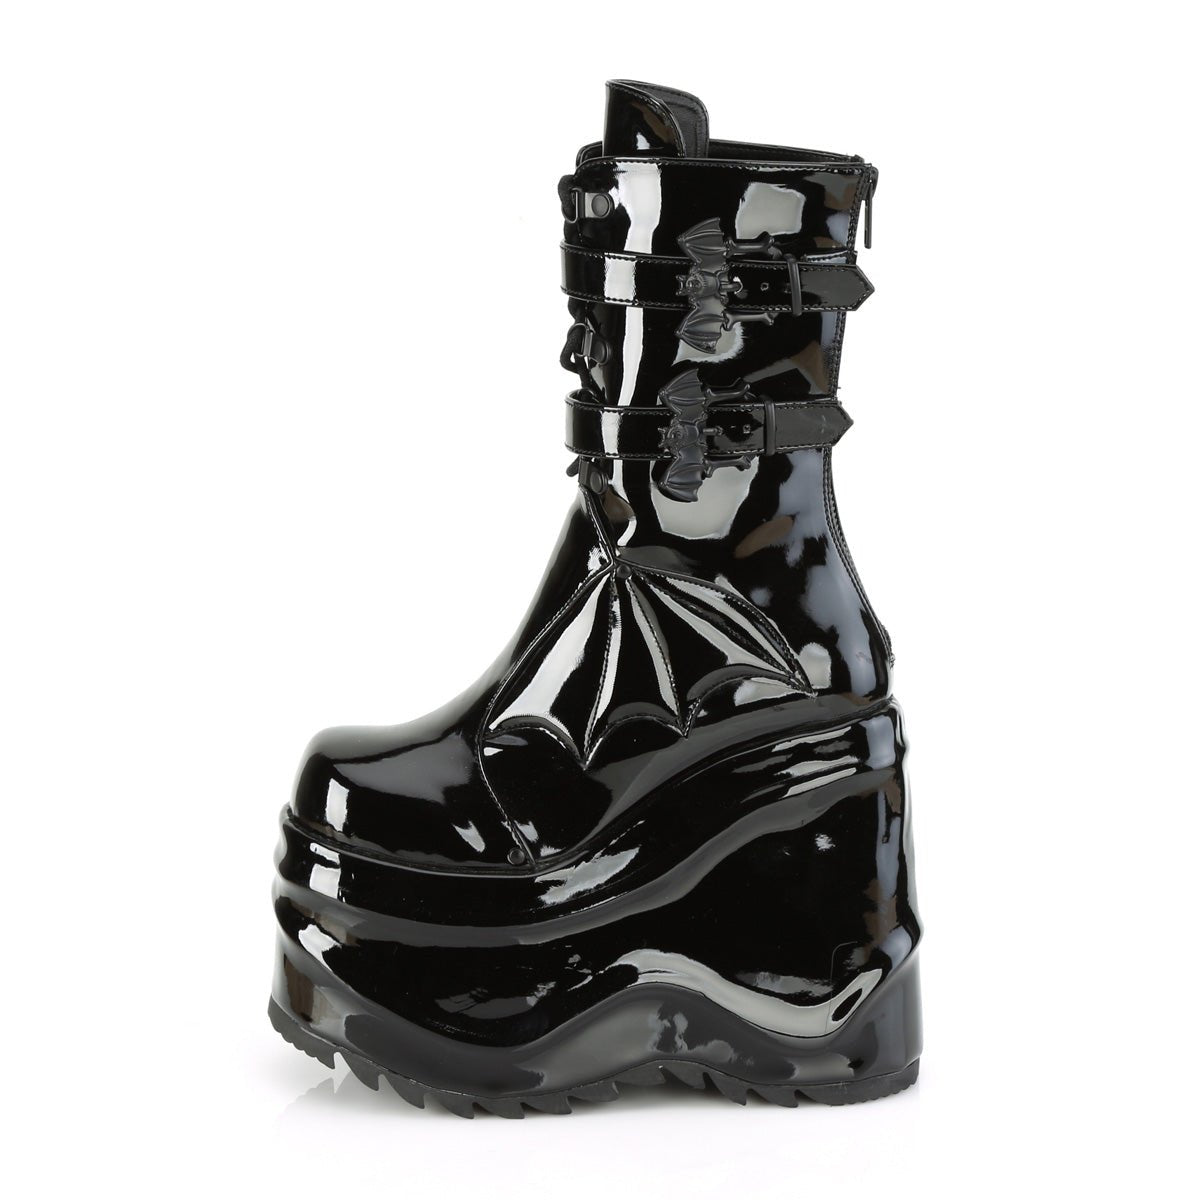 Too Fast | Demonia Wave 150 | Black Patent Leather Women's Mid Calf Boots